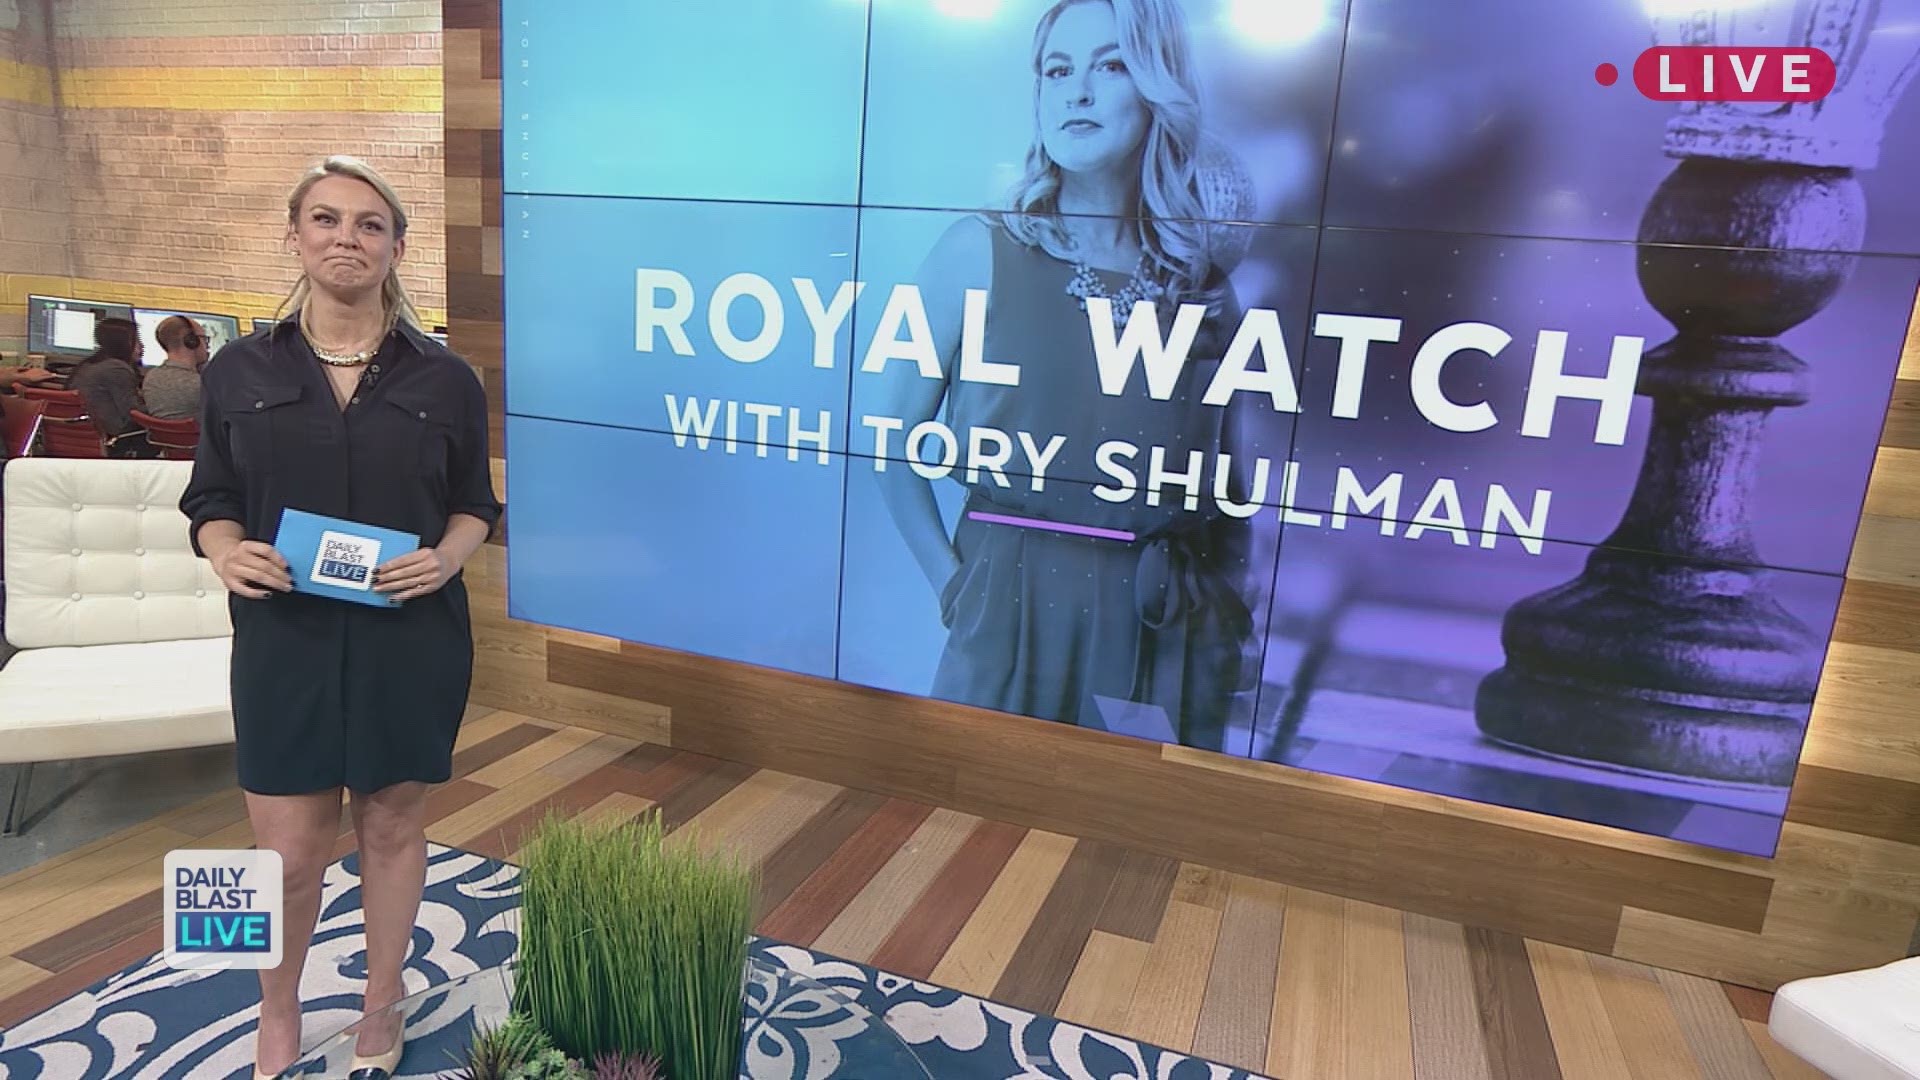 Say YES to the dress Queen! Rumor has it that Queen Elizabeth has final approval on the royal gown so former bridal stylist Tory Shulman is sharing her tips and tricks for getting 'grandmas' approval. Daily Blast LIVE is spilling the royal-tea on Meghan M